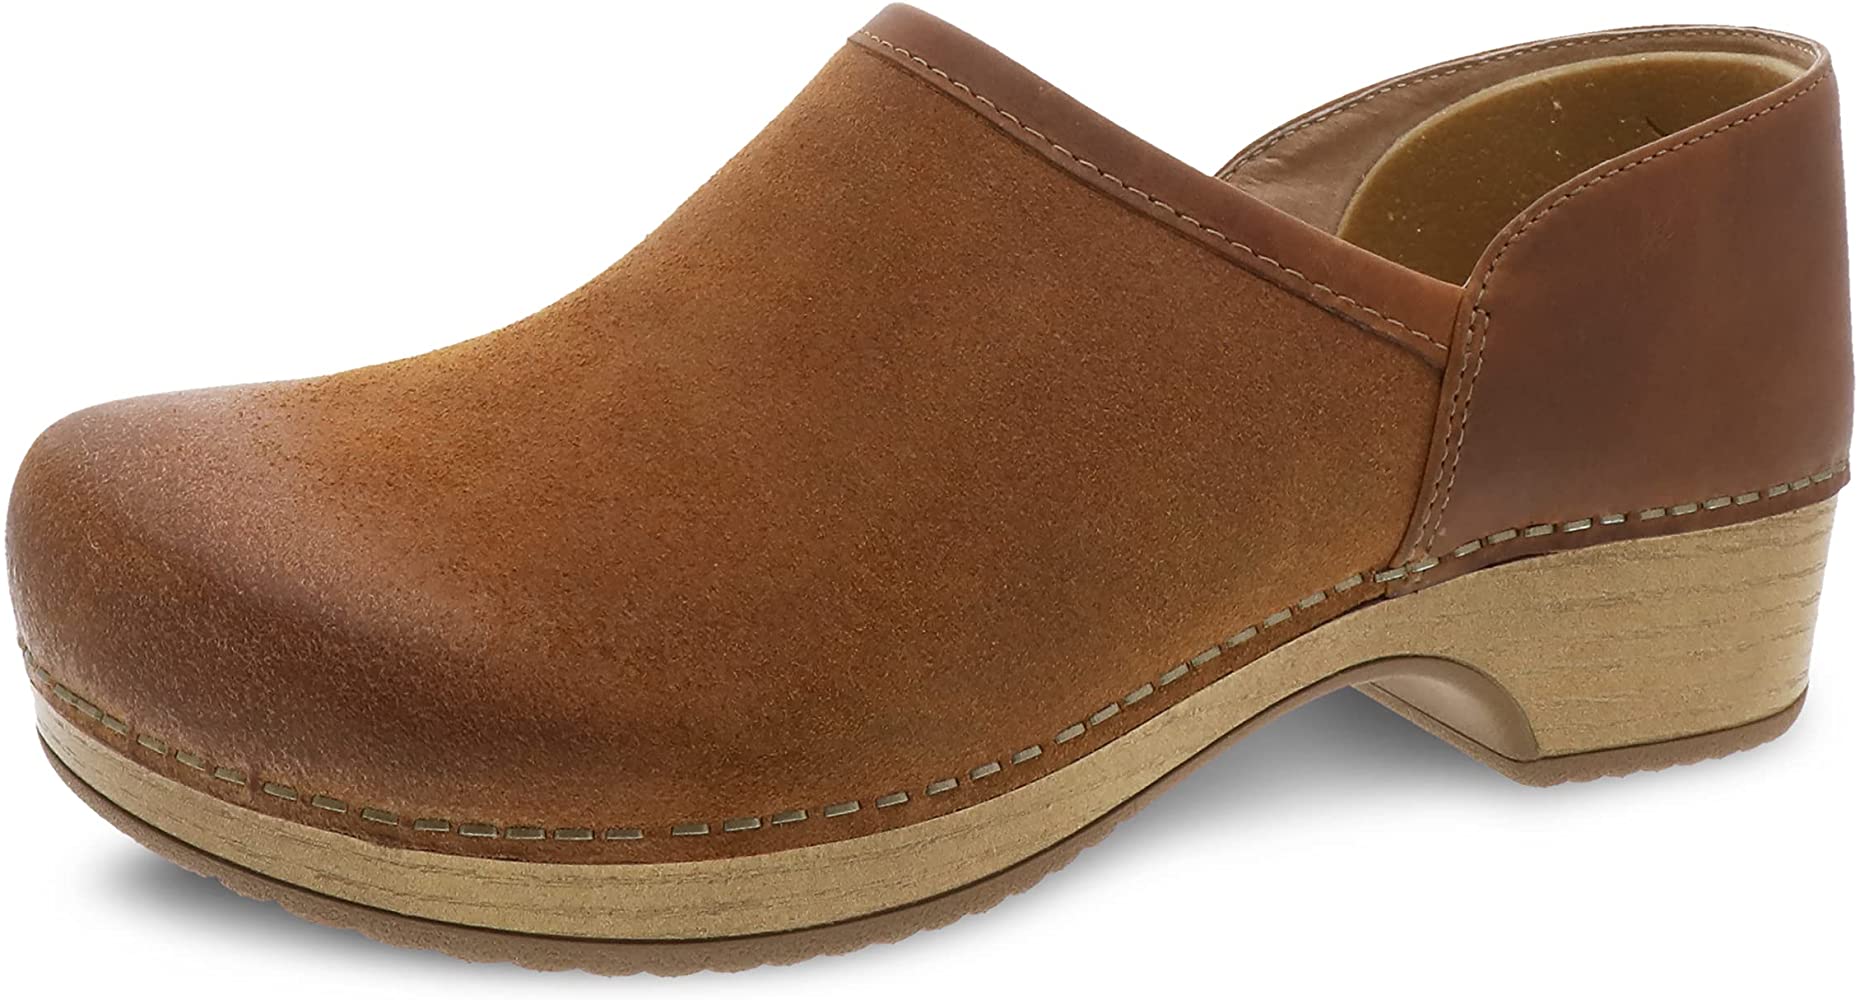 most-comfortable-clogs-for-women